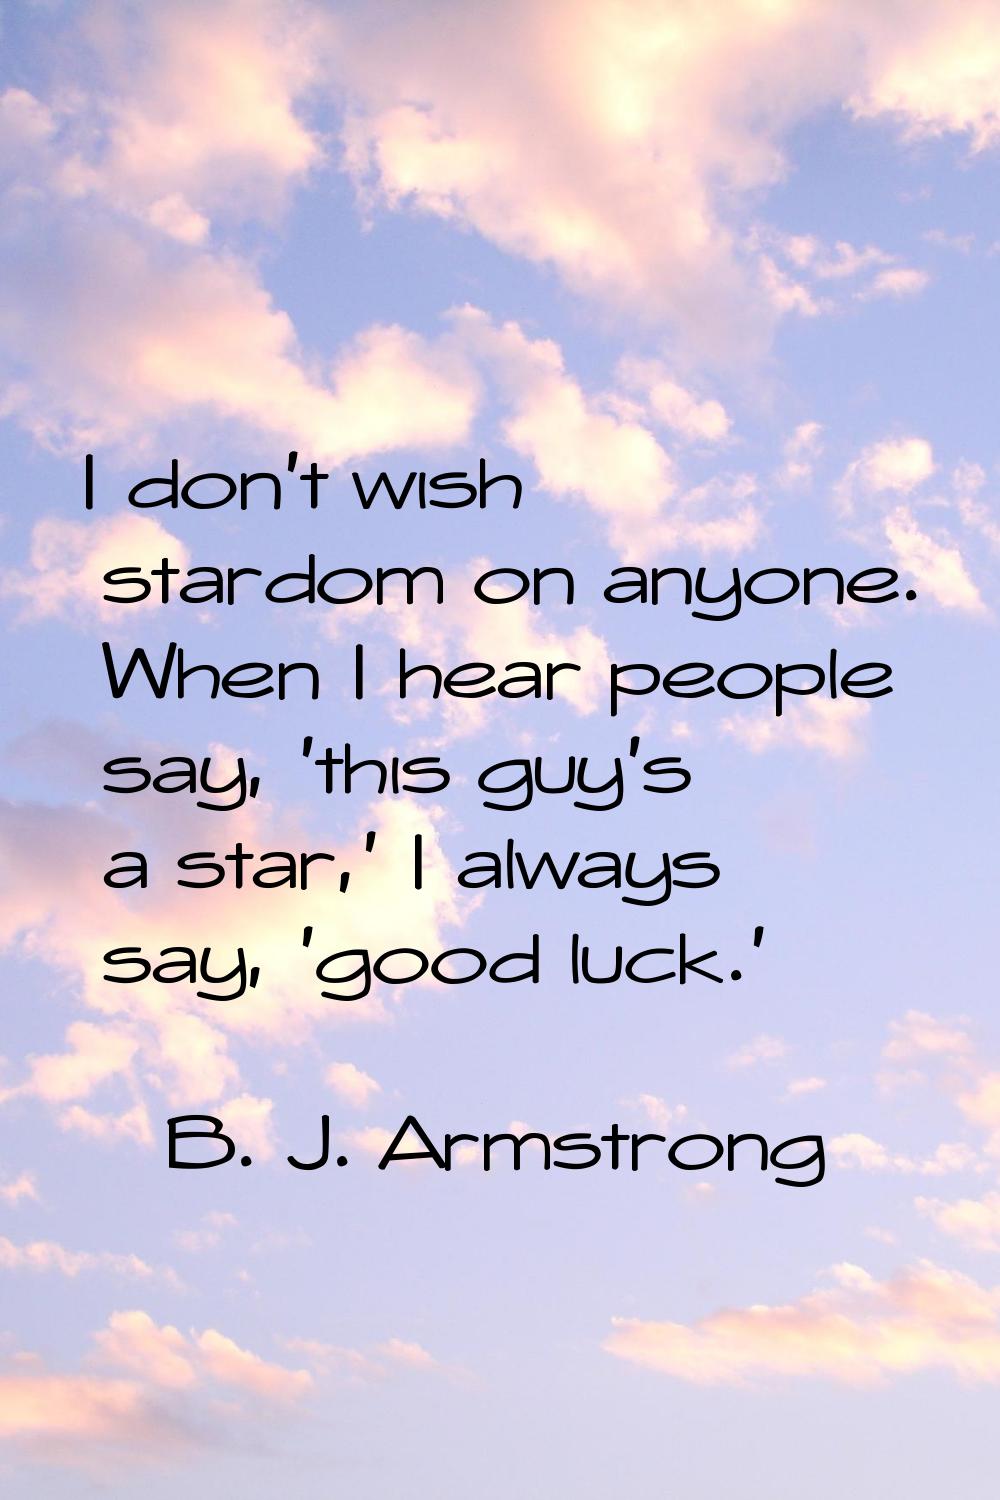 I don't wish stardom on anyone. When I hear people say, 'this guy's a star,' I always say, 'good lu